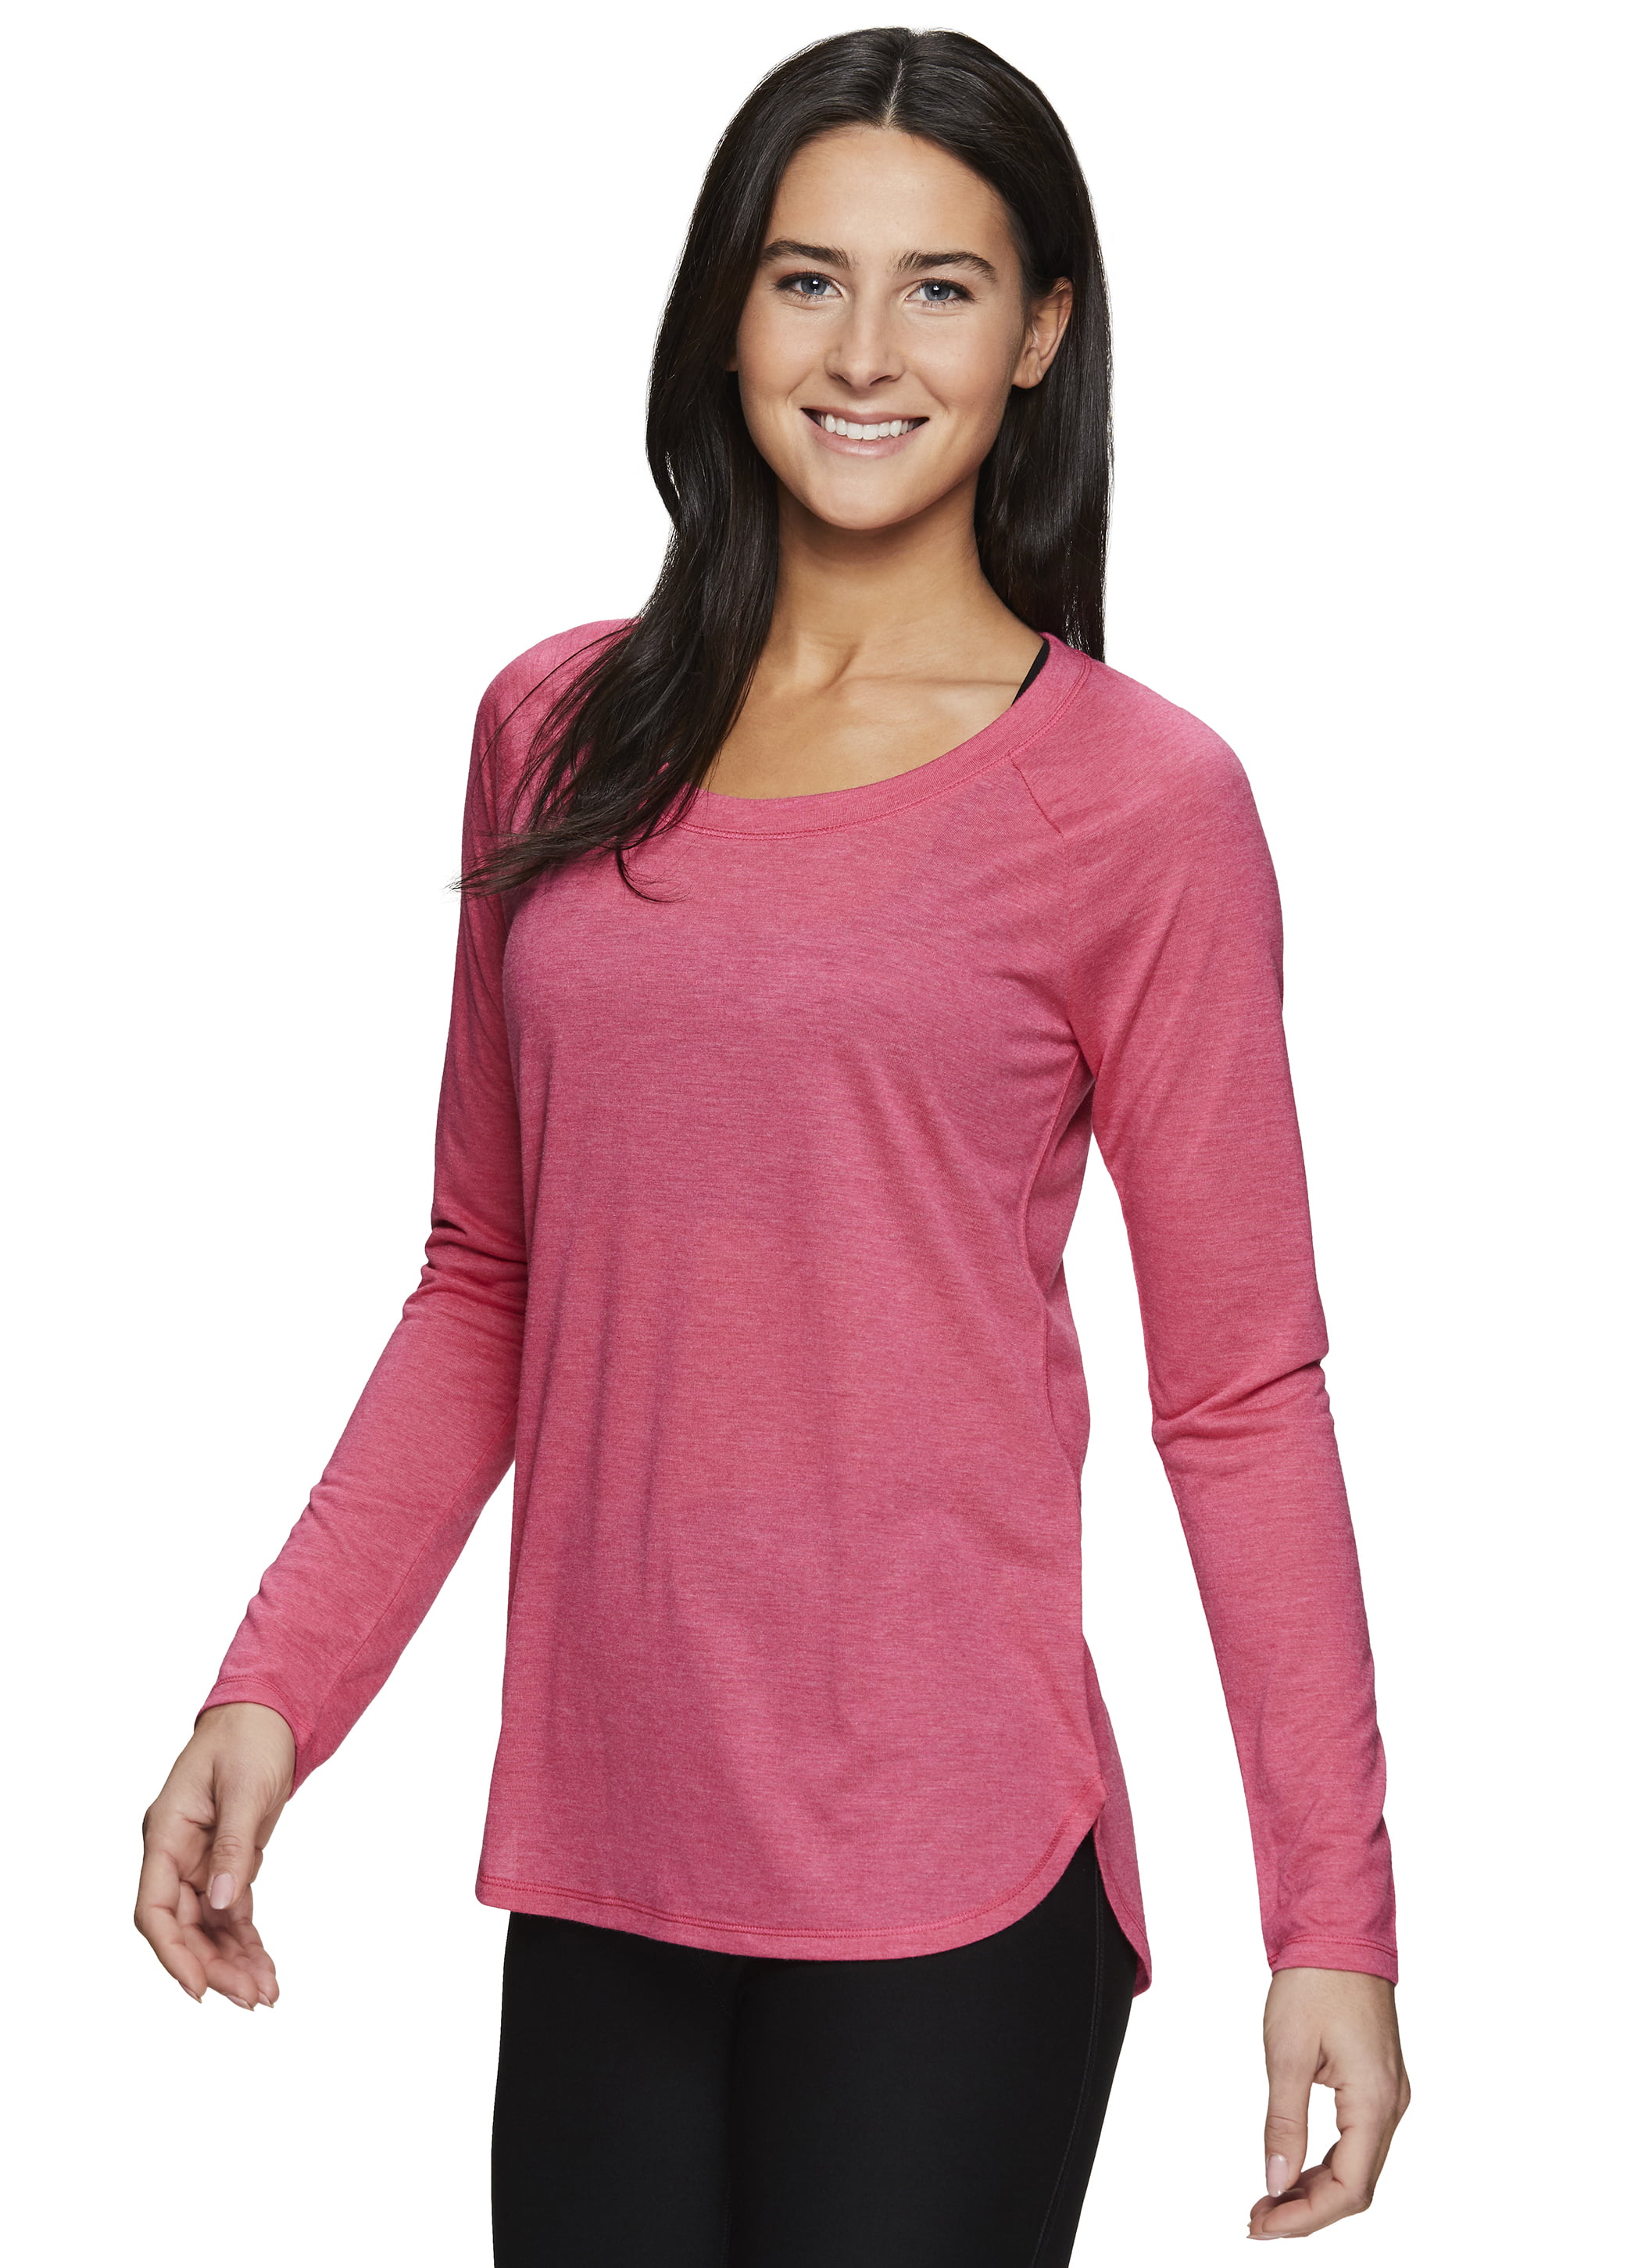 RBX - RBX Active Women's Fashion Athletic Performance Long Sleeve ...